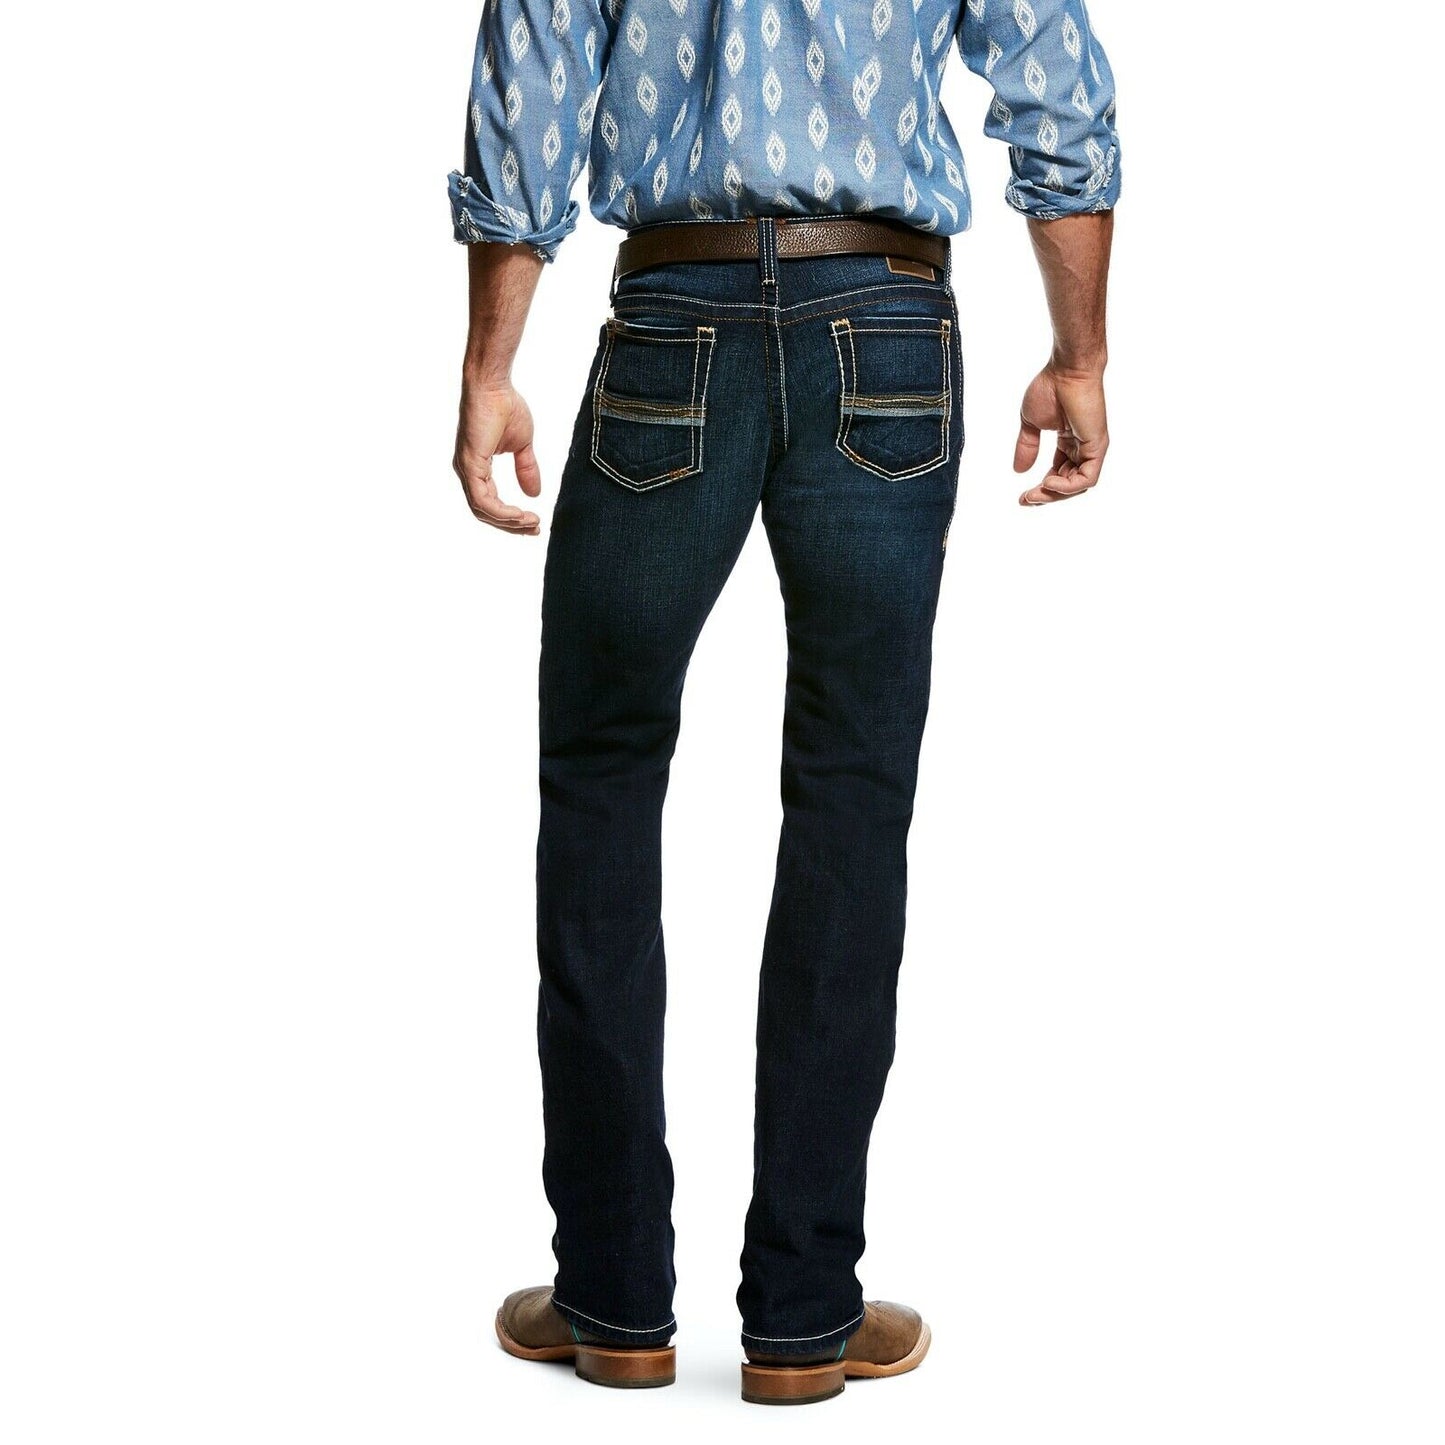 Cowboy Pant Stretchers For Jeans With Aerial Aluminium Alloy